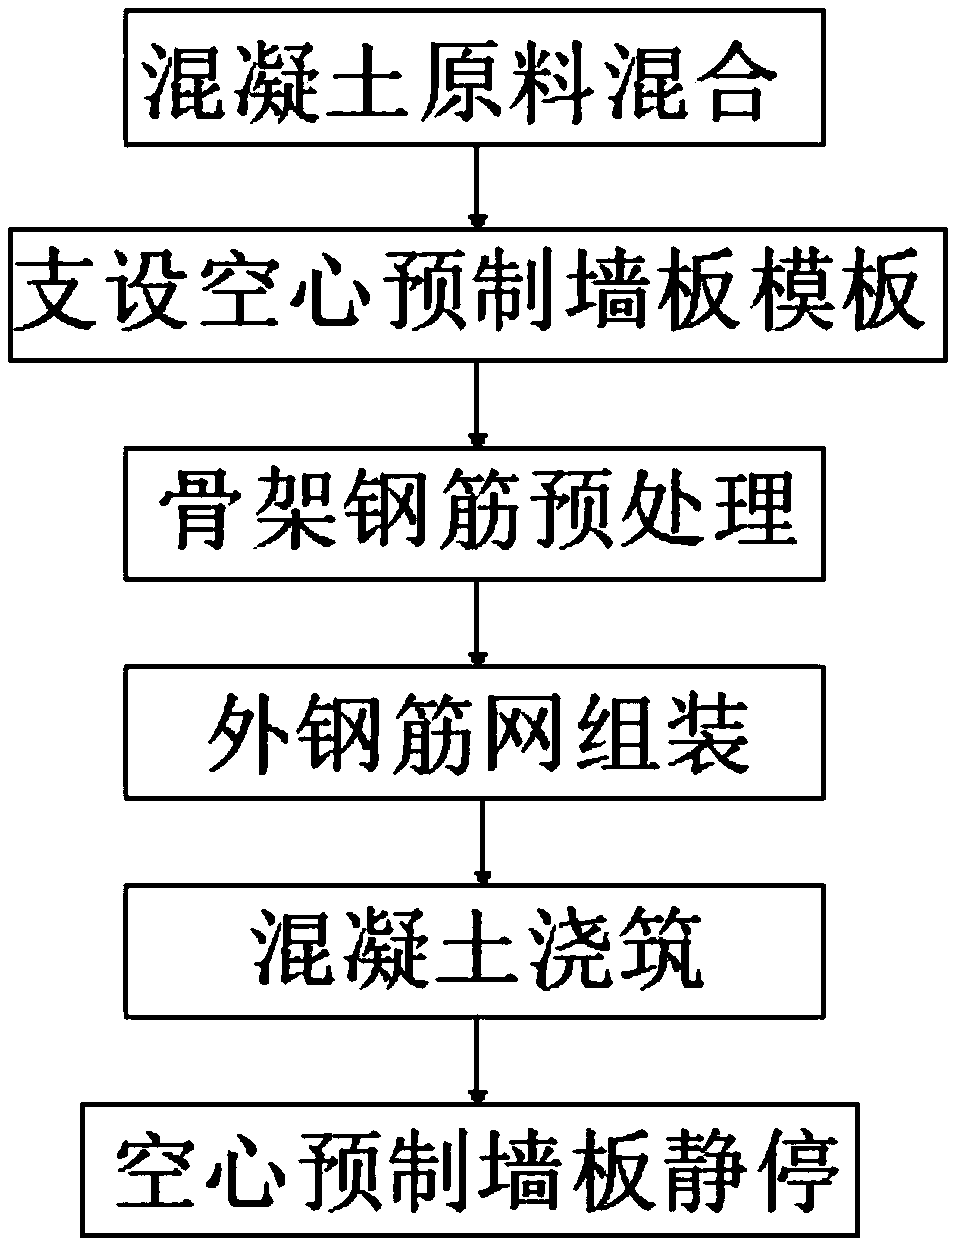 Preparation method of waste heat recycling concrete